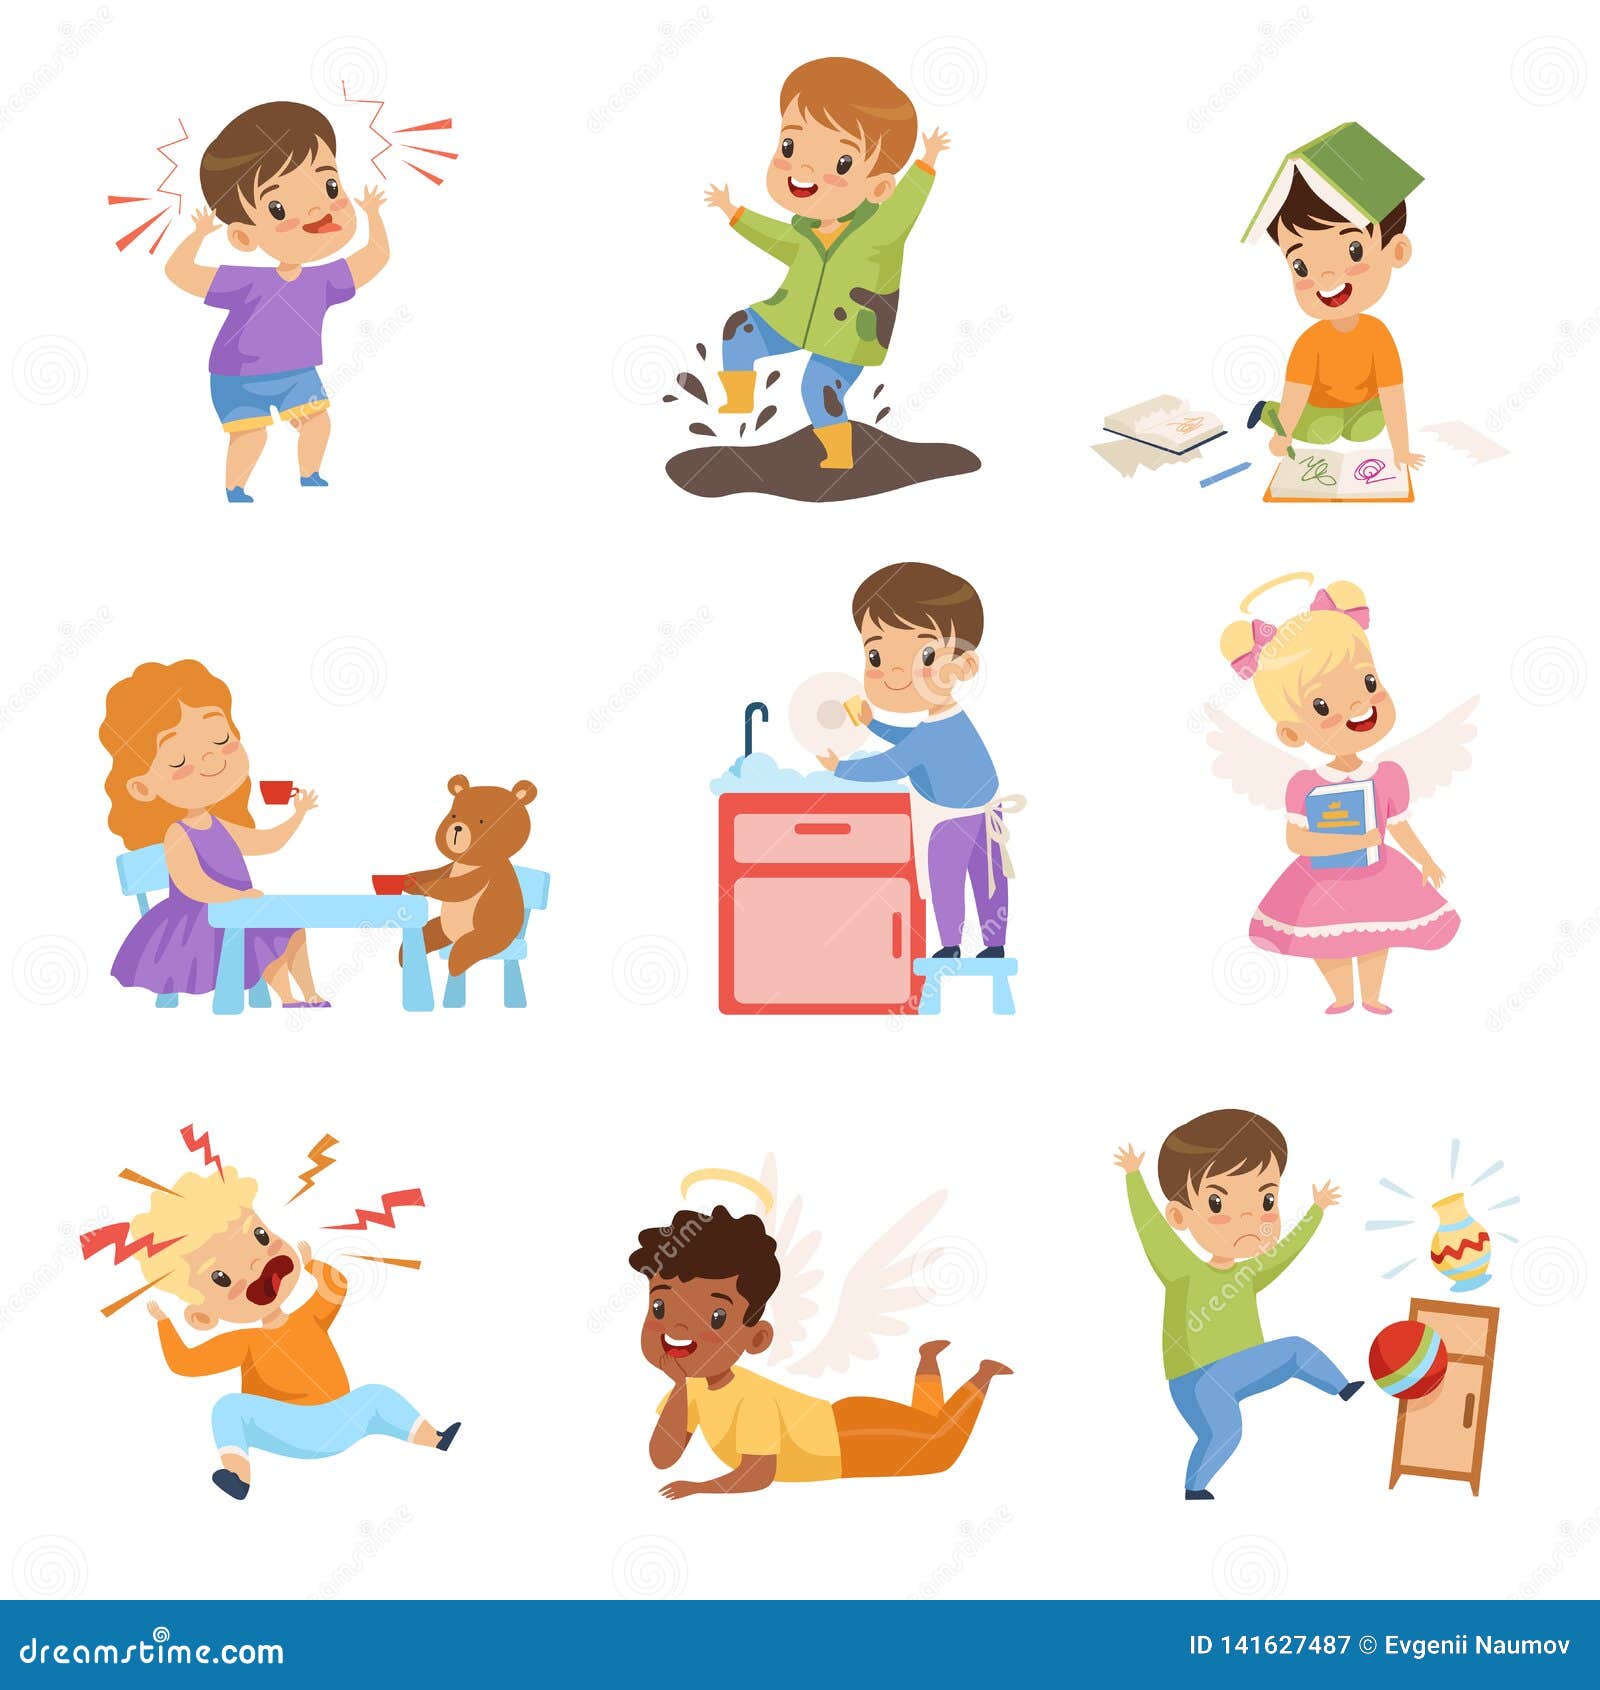 Naughty and Obedient Kids Set, Children with Good Manners and Hooligans  Vector Illustration Stock Vector - Illustration of behavior, person:  141627487